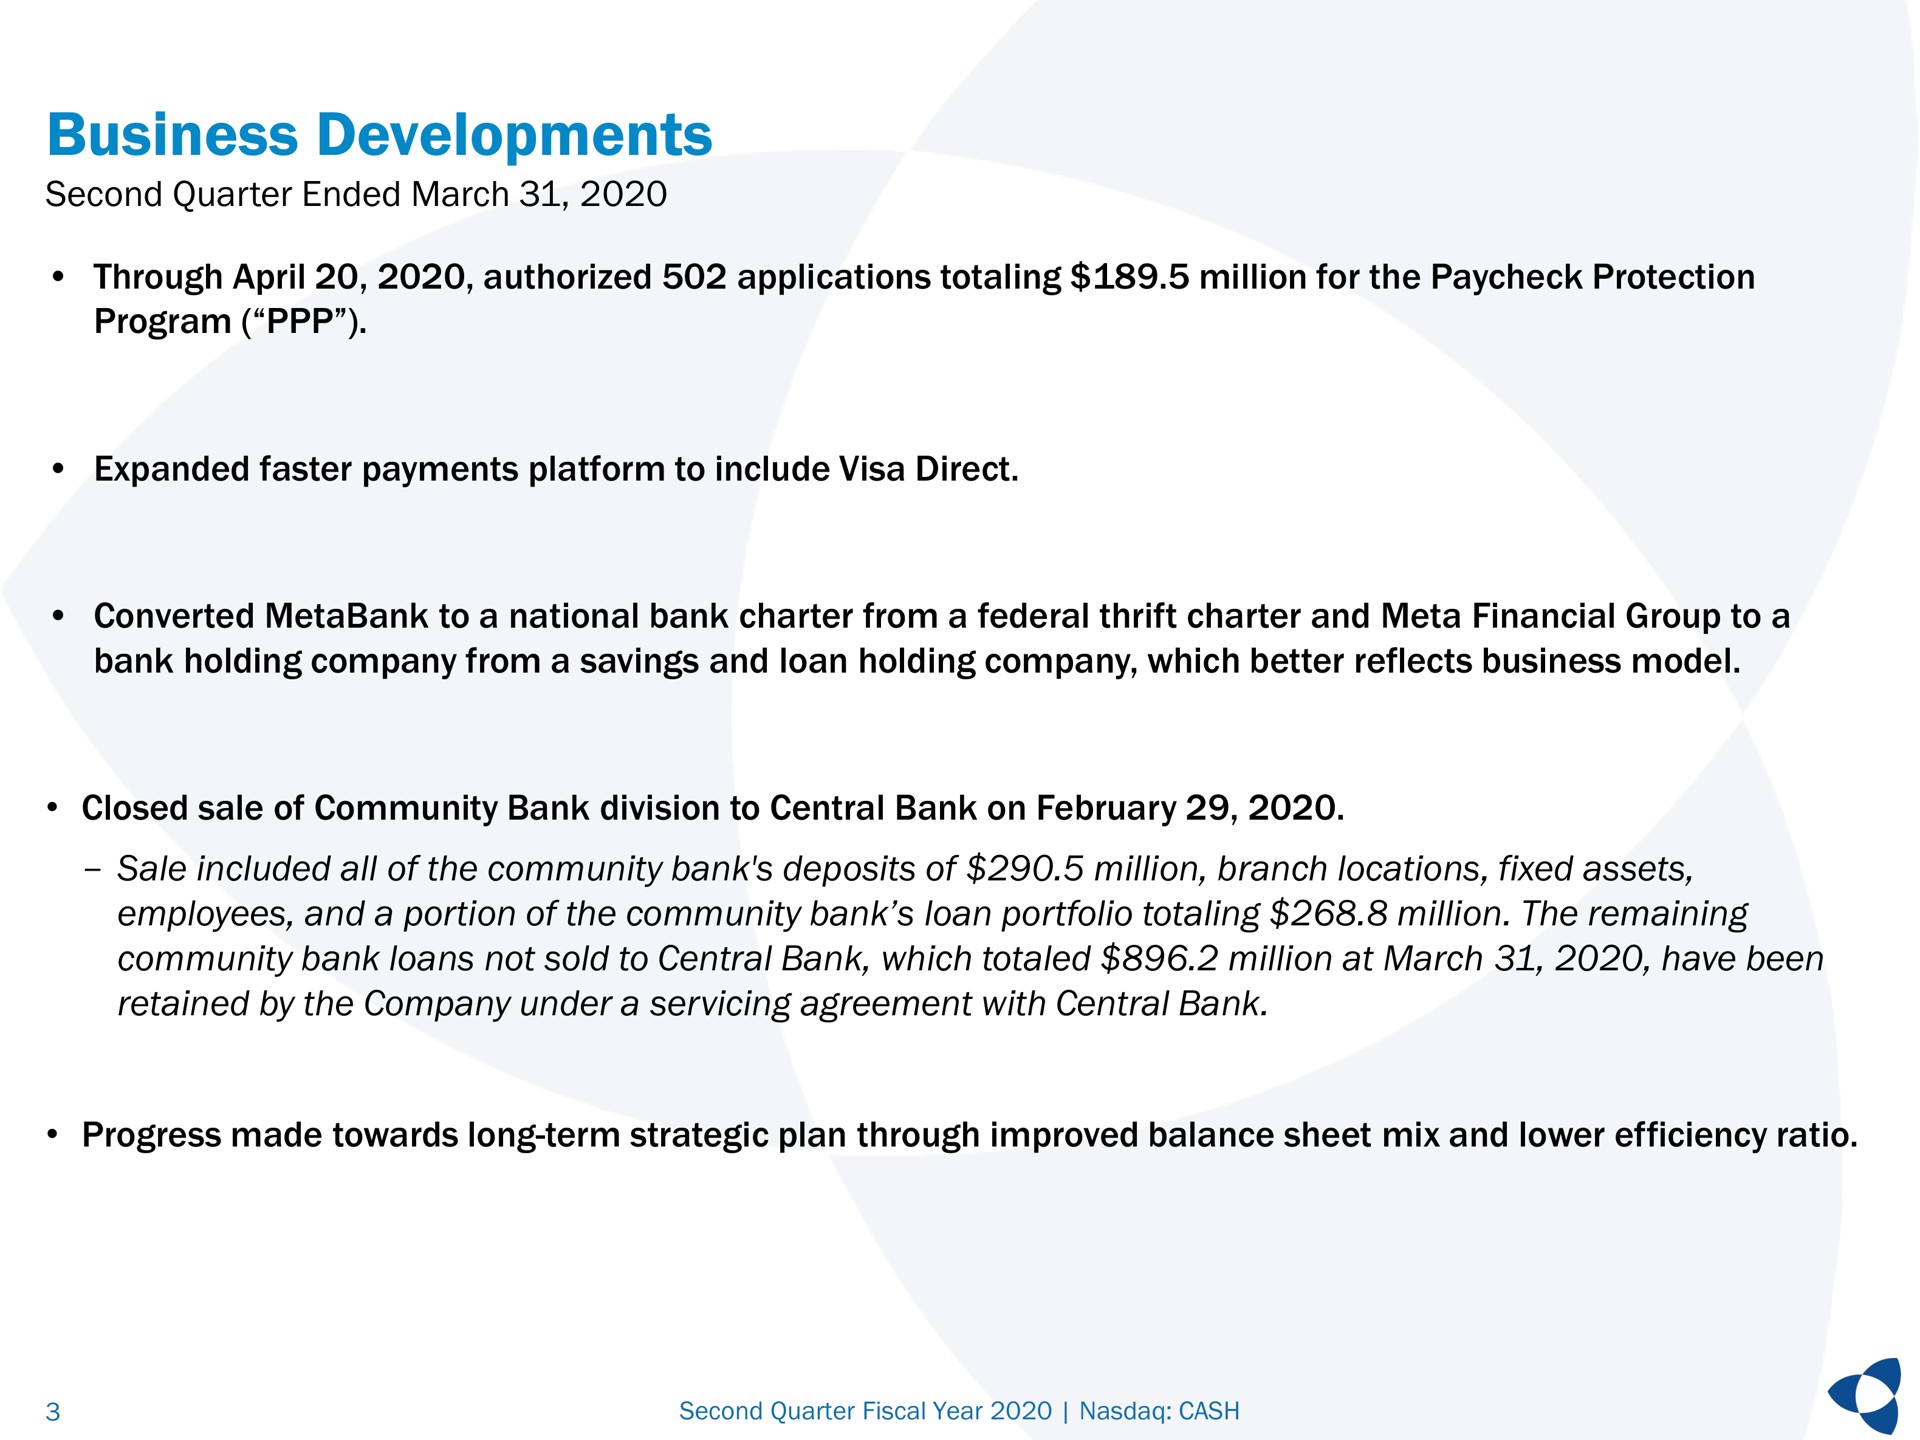 business developments second quarter ended march through authorized applications totaling million for the protection program expanded faster payments platform to include visa direct converted to a national bank charter from a federal thrift charter and meta financial group to a bank holding company from a savings and loan holding company which better reflects business model closed sale of community bank division to central bank on sale included all of the community bank deposits of million branch locations fixed assets employees and a portion of the community bank loan portfolio totaling million the remaining community bank loans not sold to central bank which totaled million at march have been retained by the company under a servicing agreement with central bank progress made towards long term strategic plan through improved balance sheet mix and lower efficiency ratio | Pathward Financial